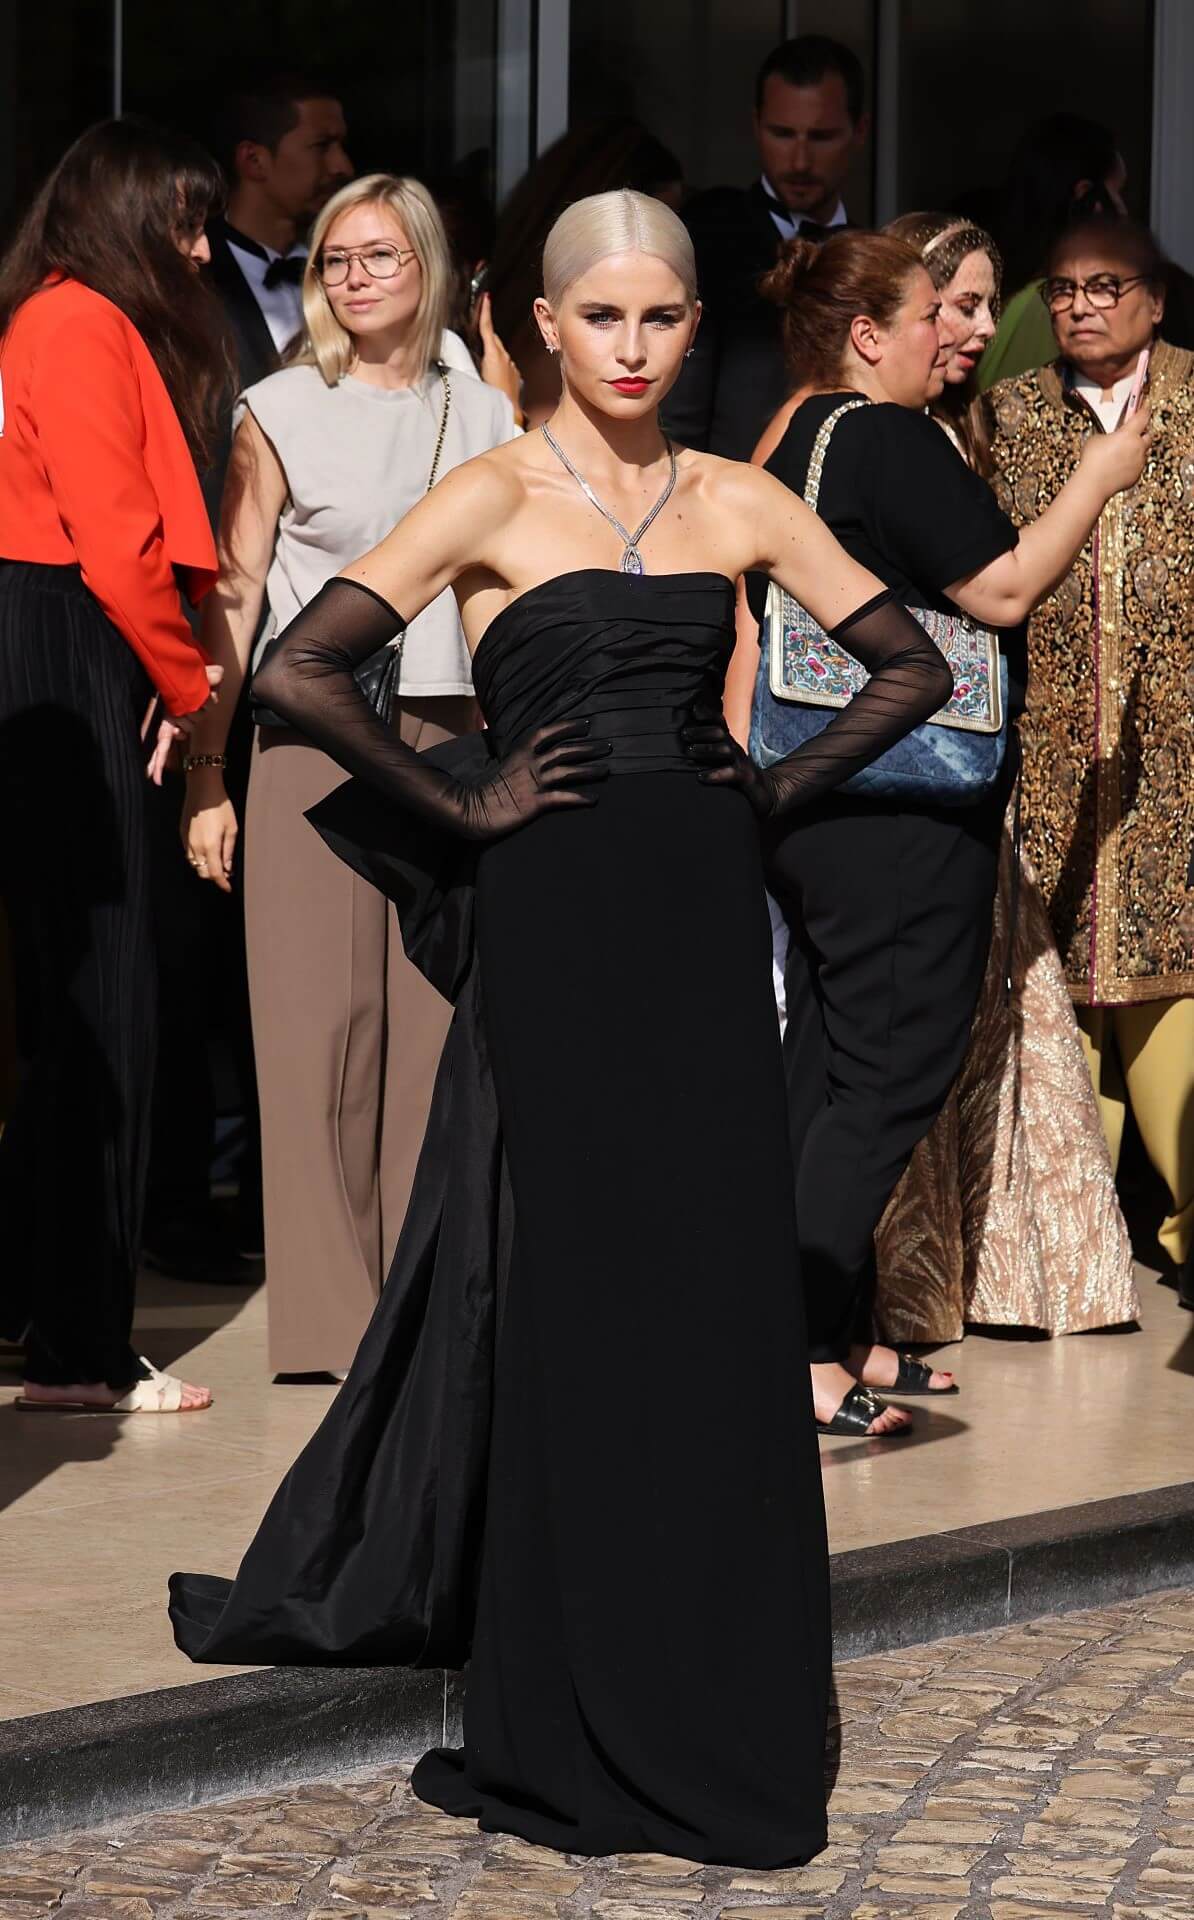 Caro Daur In Black Strapless Long Gown With Gloves At  Hotel Martinez in Cannes